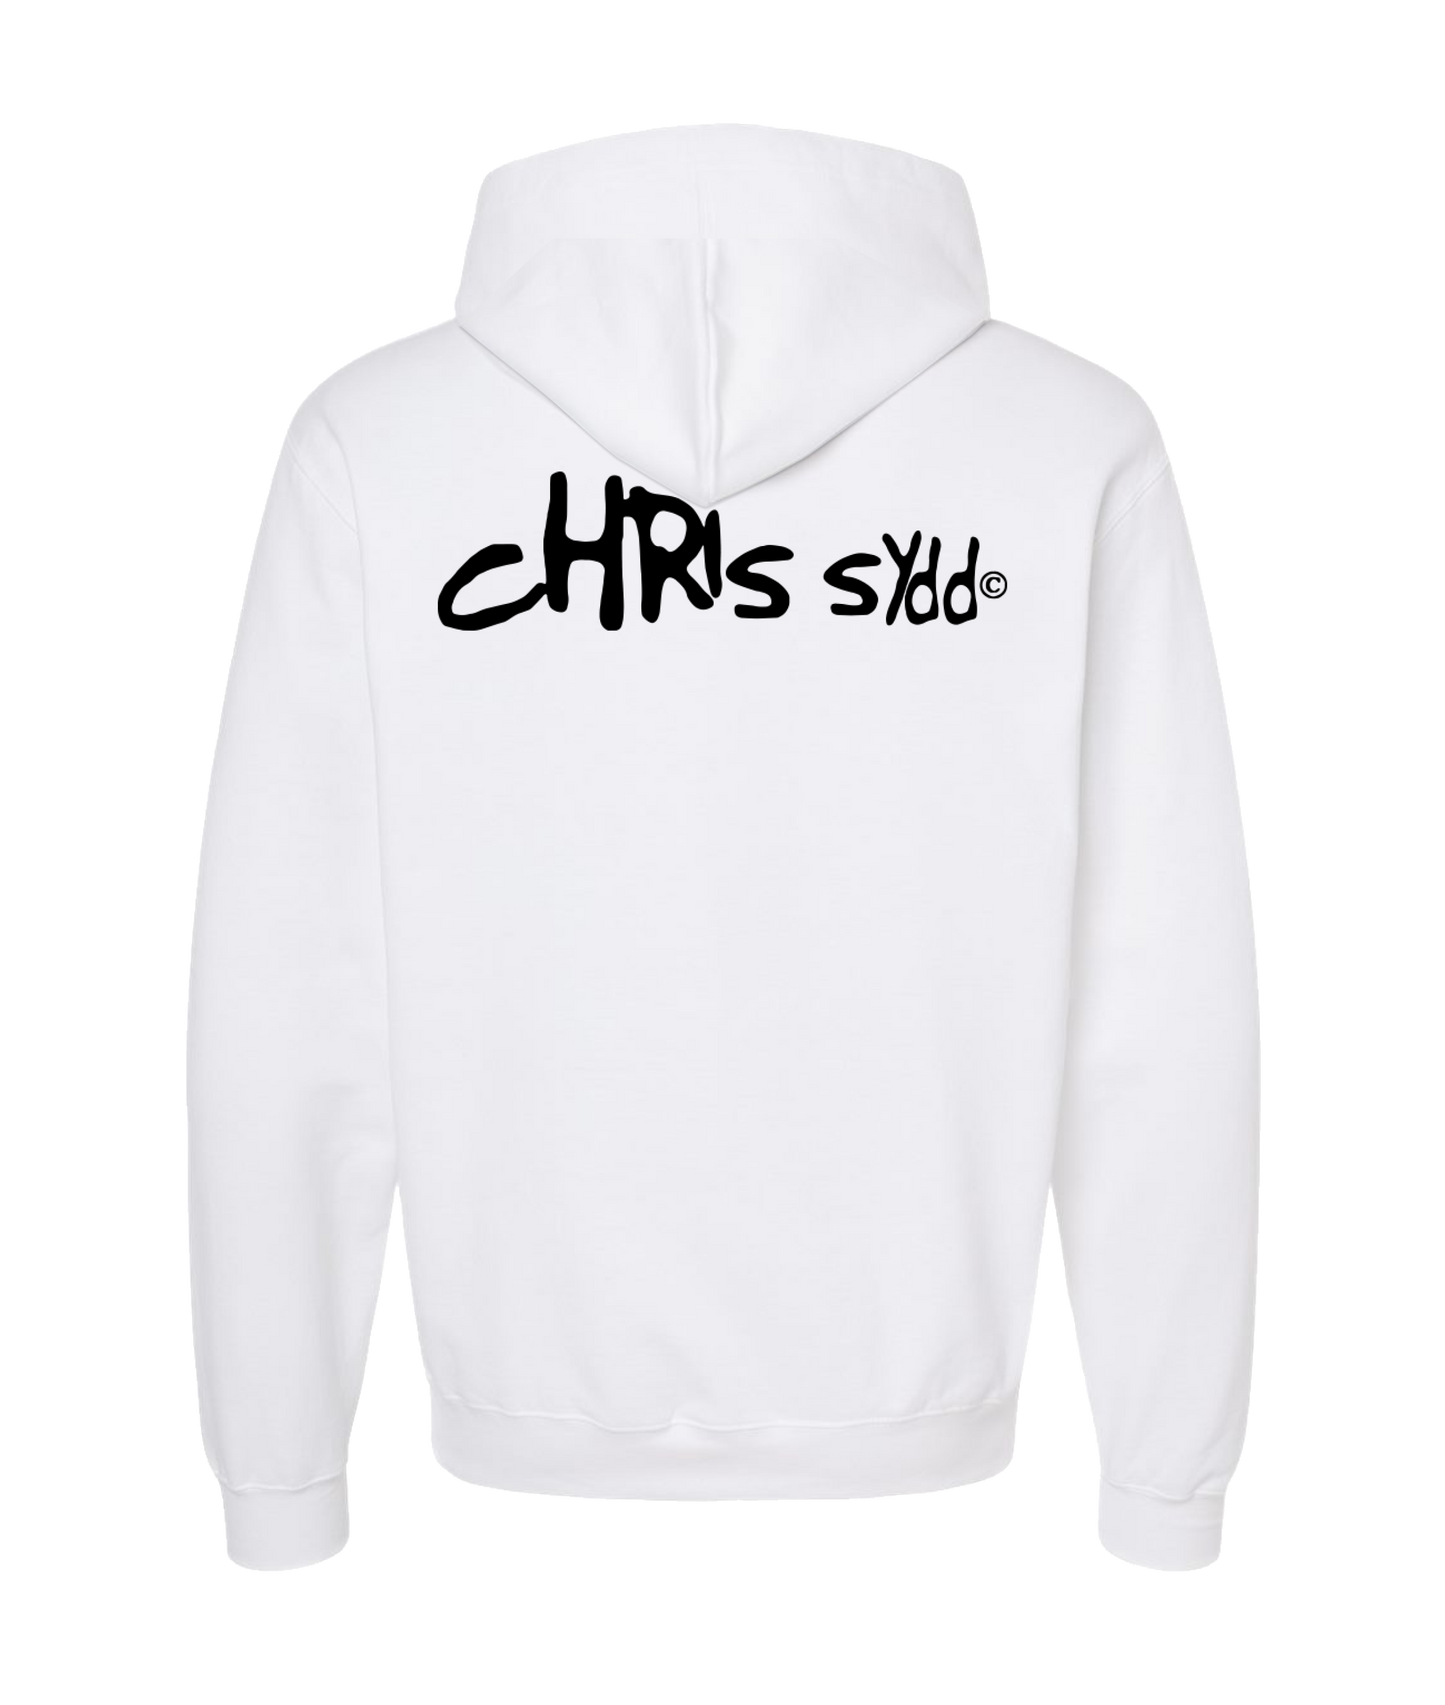 CHRIS SYDD - It Looks Just As Stupid When You Do It. - White Hoodie